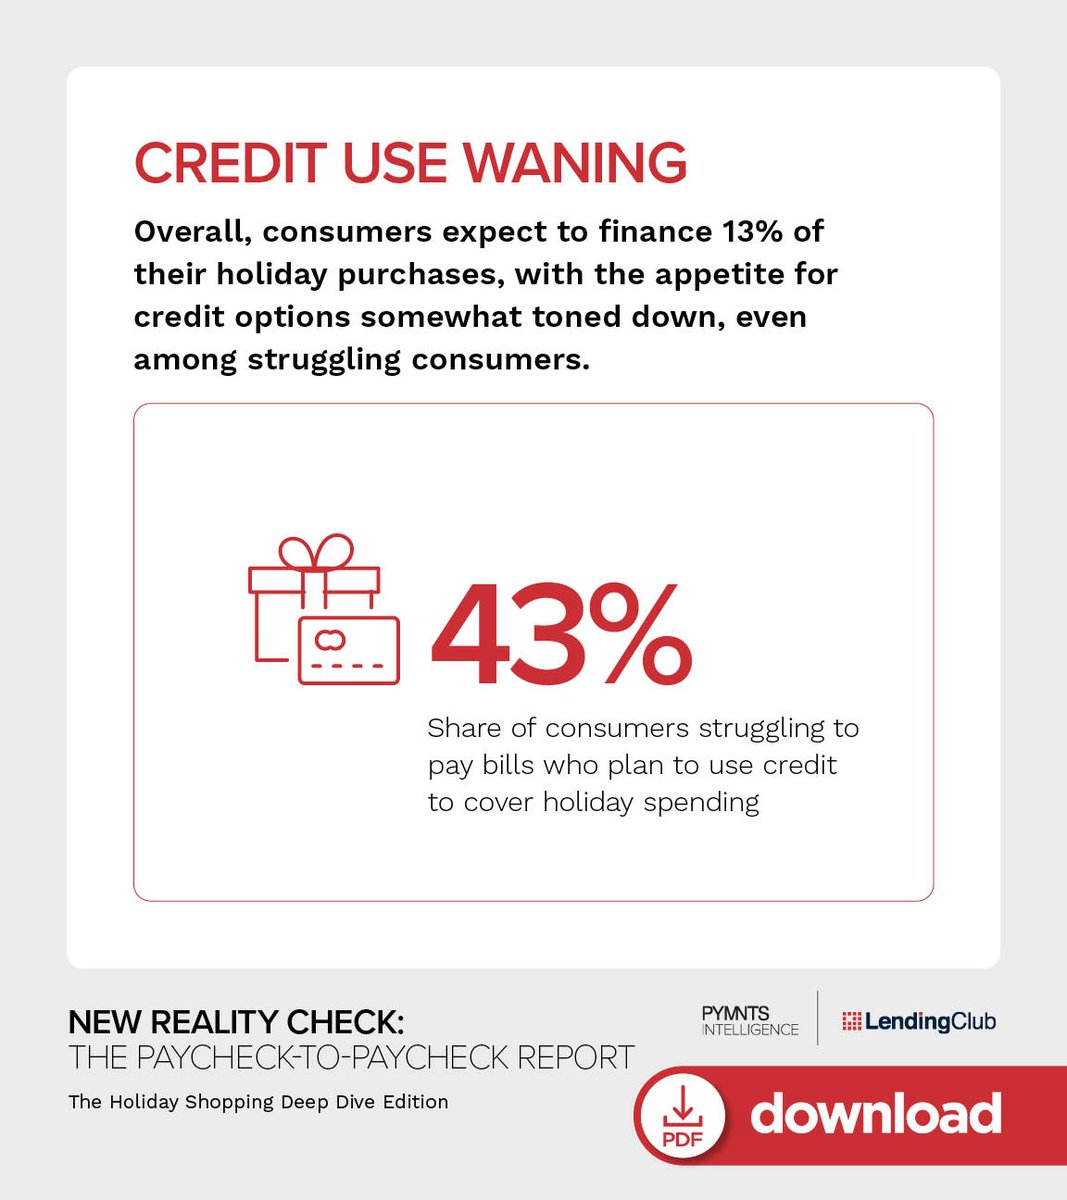 New data finds 77% of consumers plan to participate in the 2023 holiday shopping season, though many cite access to fewer resources as a reason to spend less overall. Check out the full report here: ow.ly/gsKc50Q9who